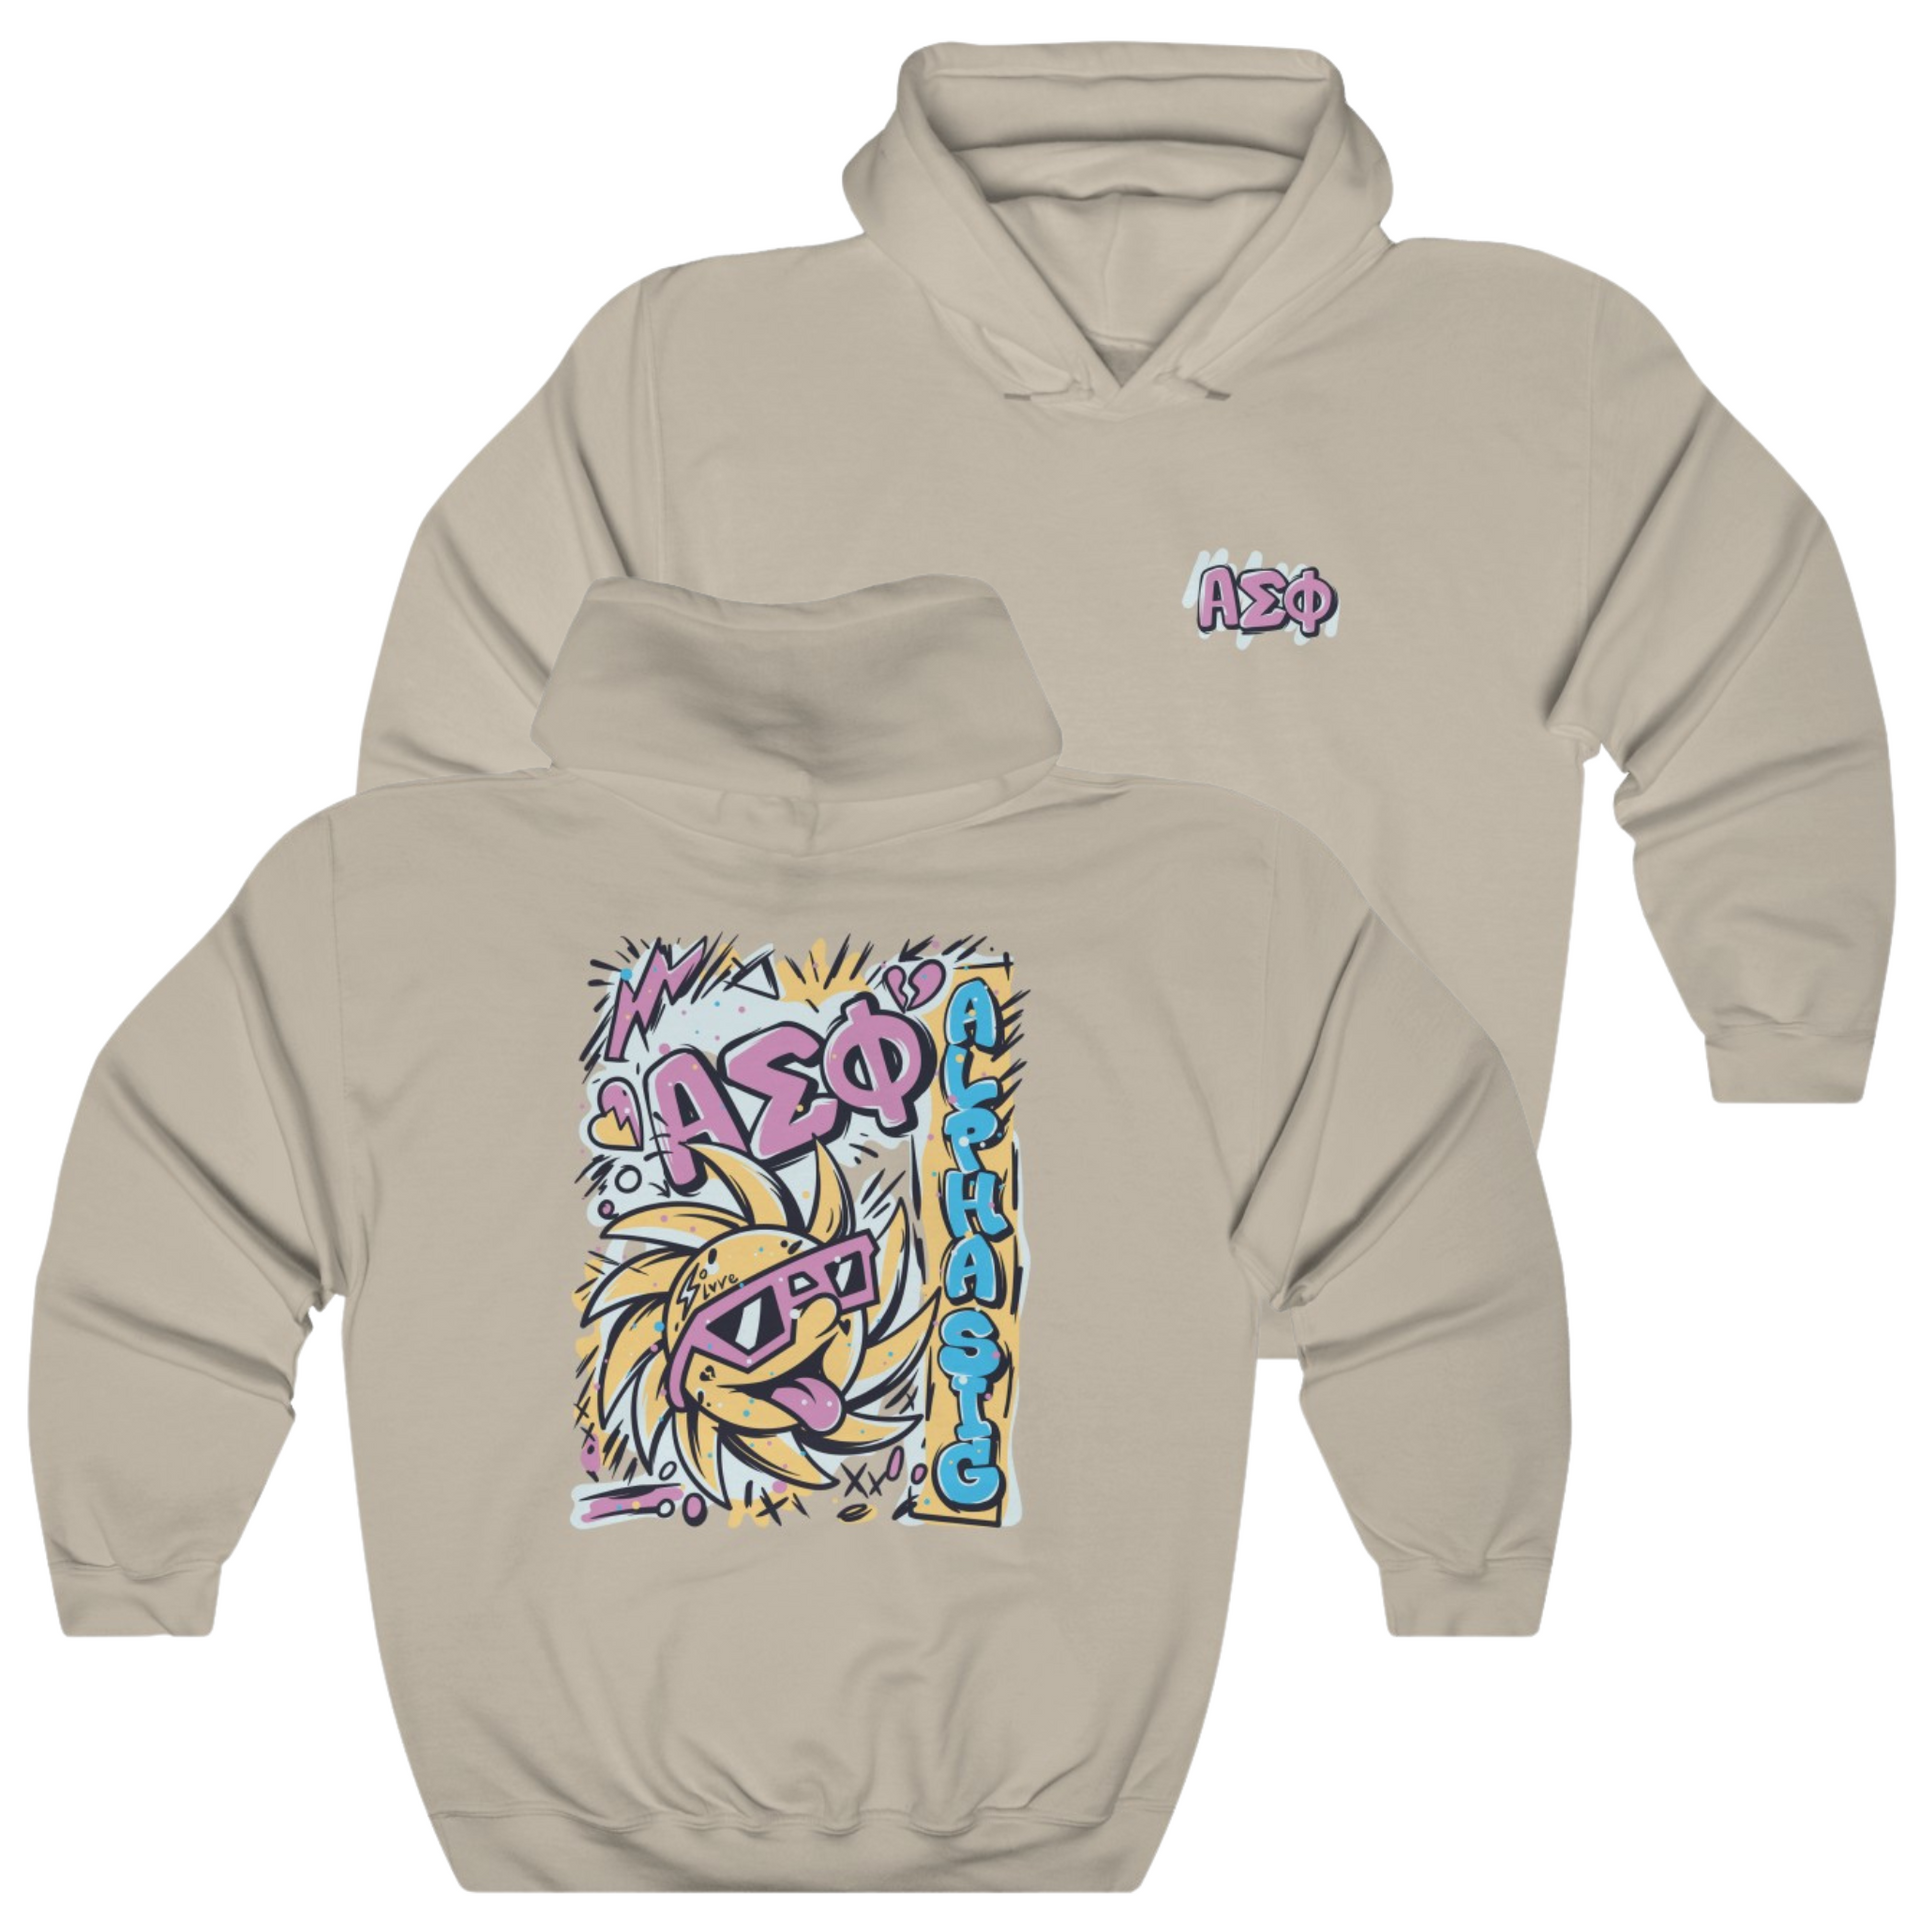 Sand Alpha Sigma Phi Graphic Hoodie | Fun in the Sun | Alpha Sigma Phi Fraternity 